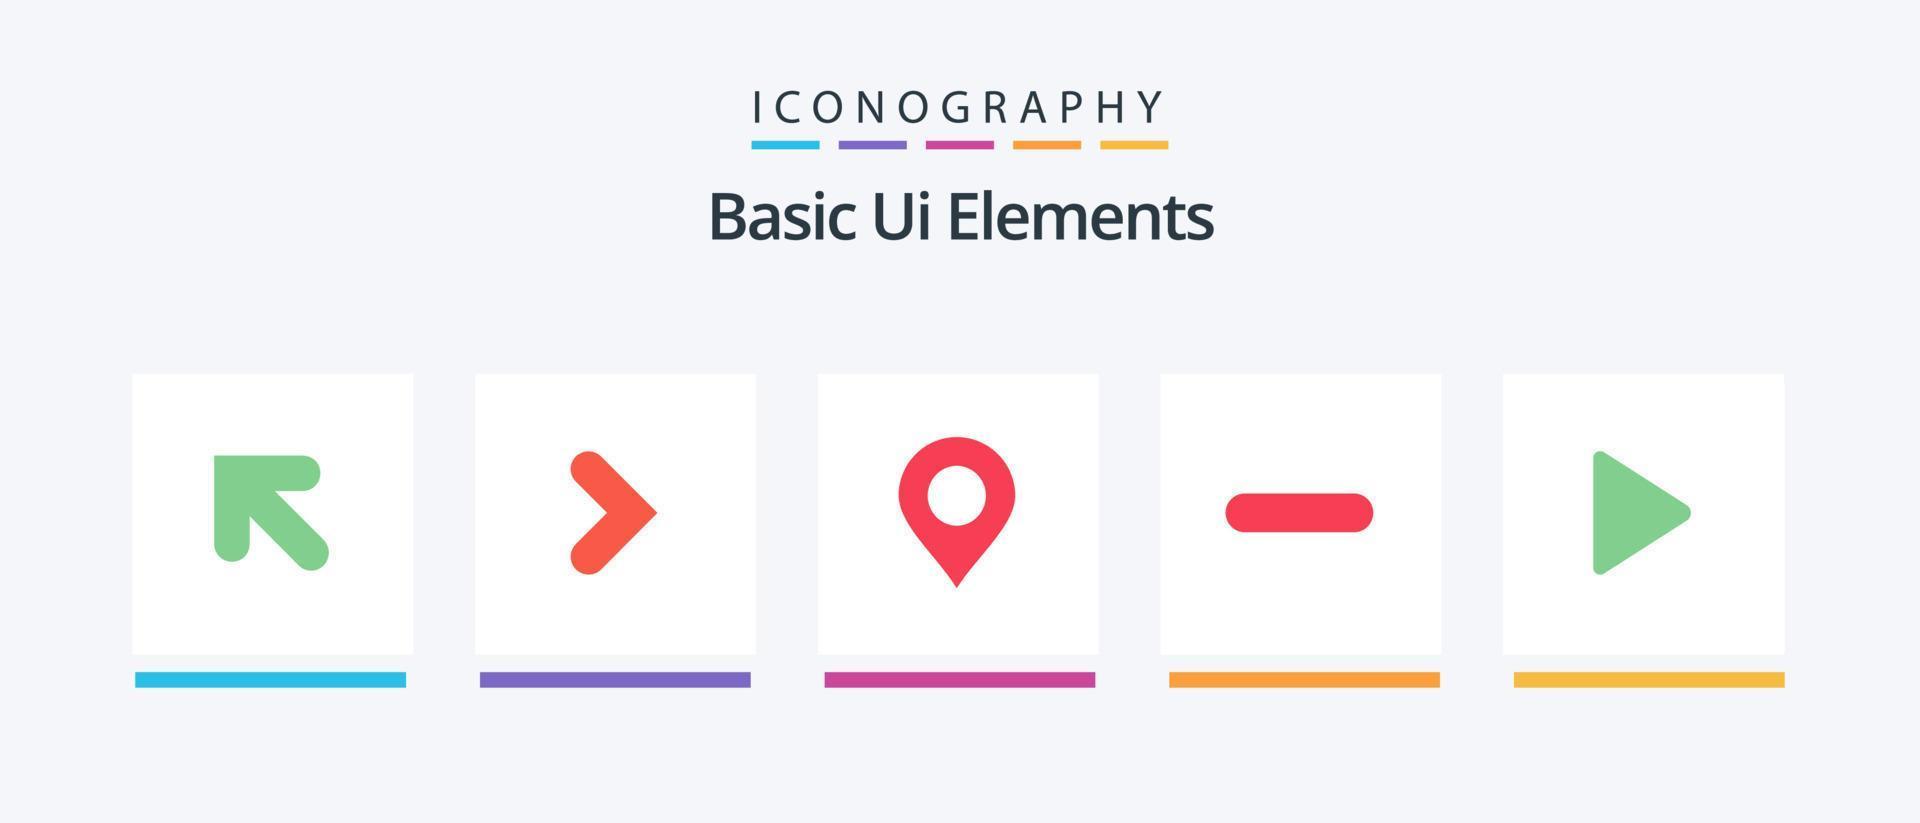 Basic Ui Elements Flat 5 Icon Pack Including play. control. location. remove. less. Creative Icons Design vector